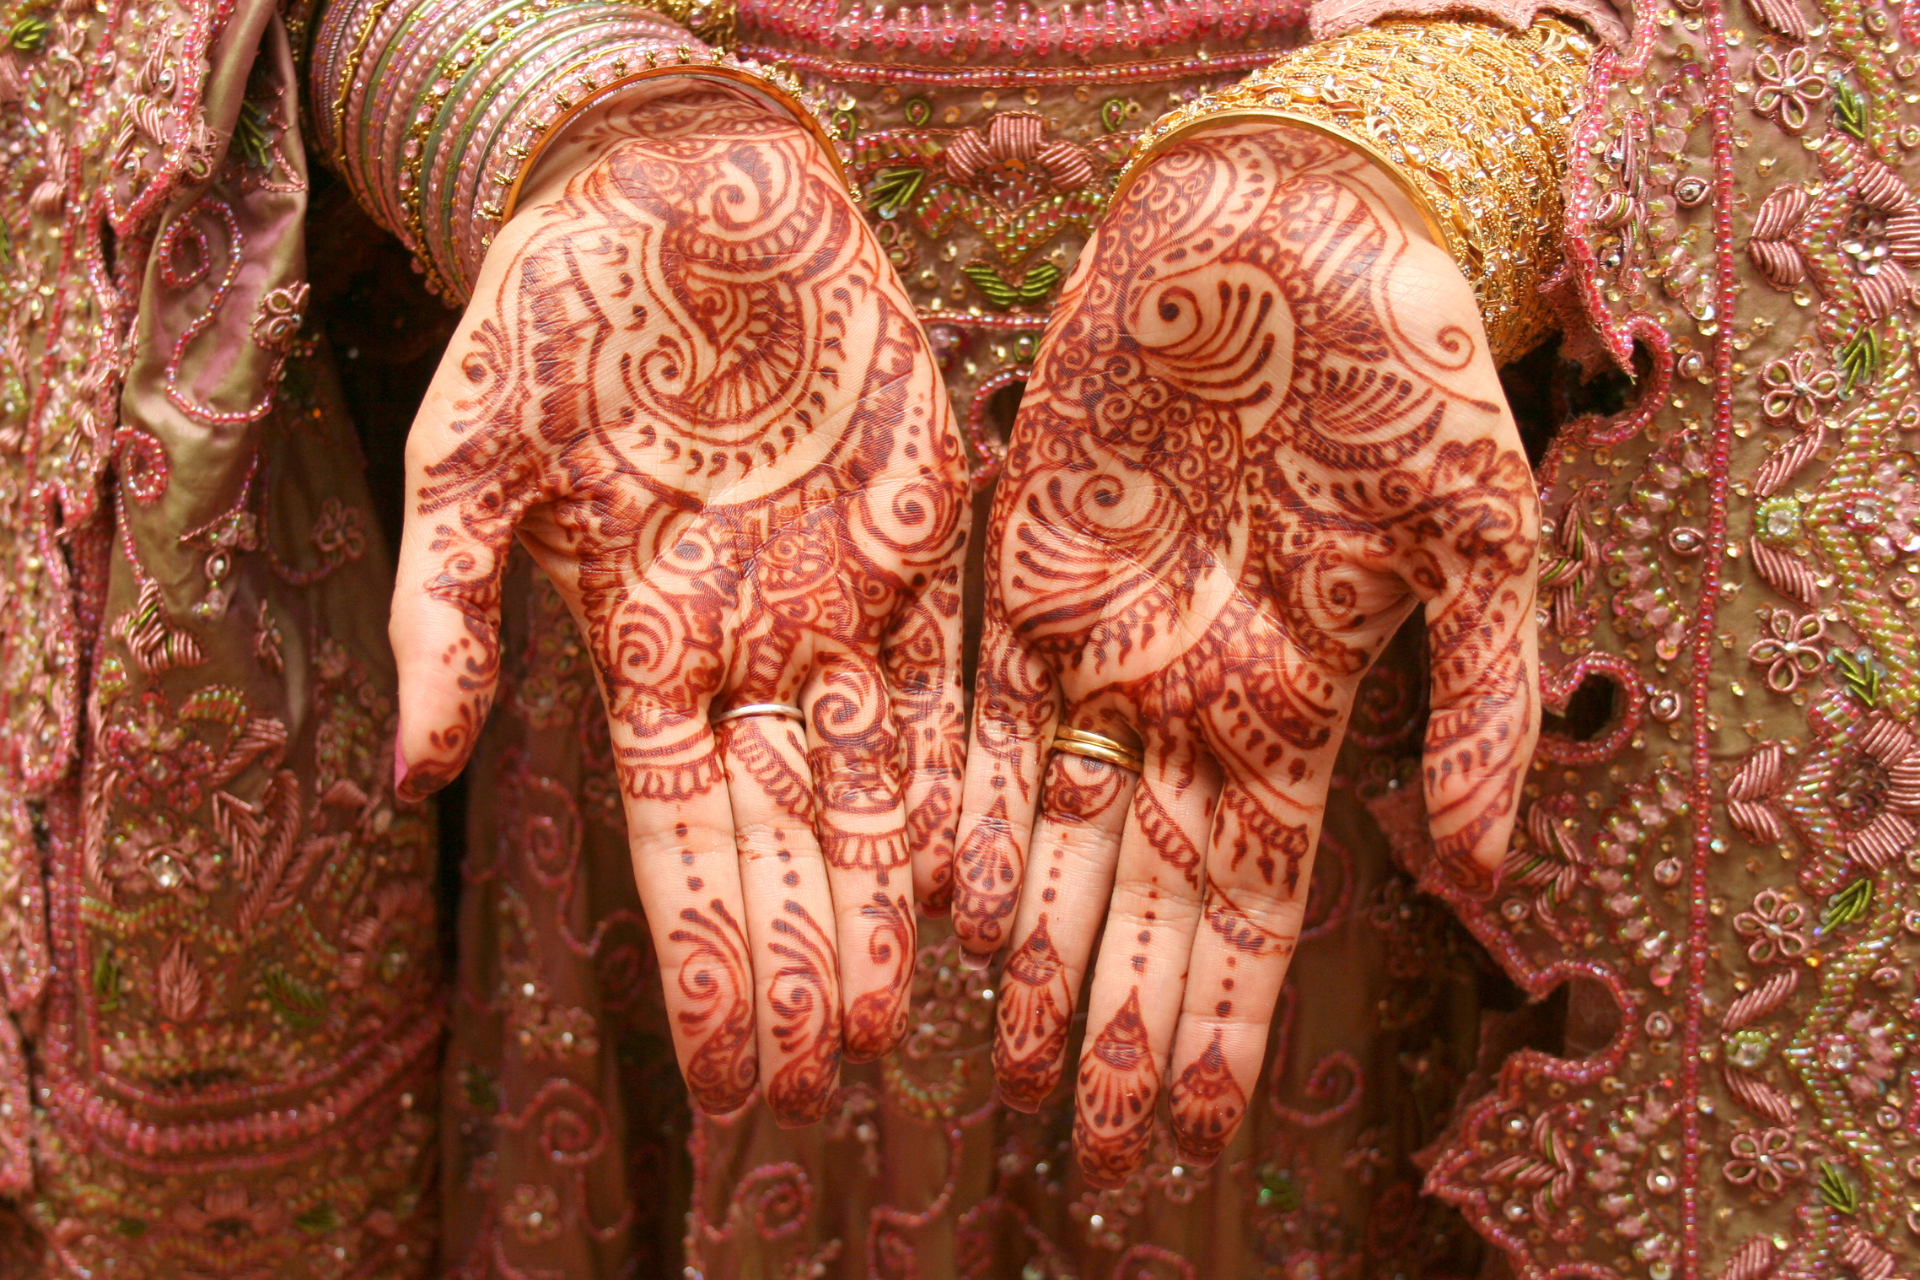 Picture of model showing her hands with the Henna art applied